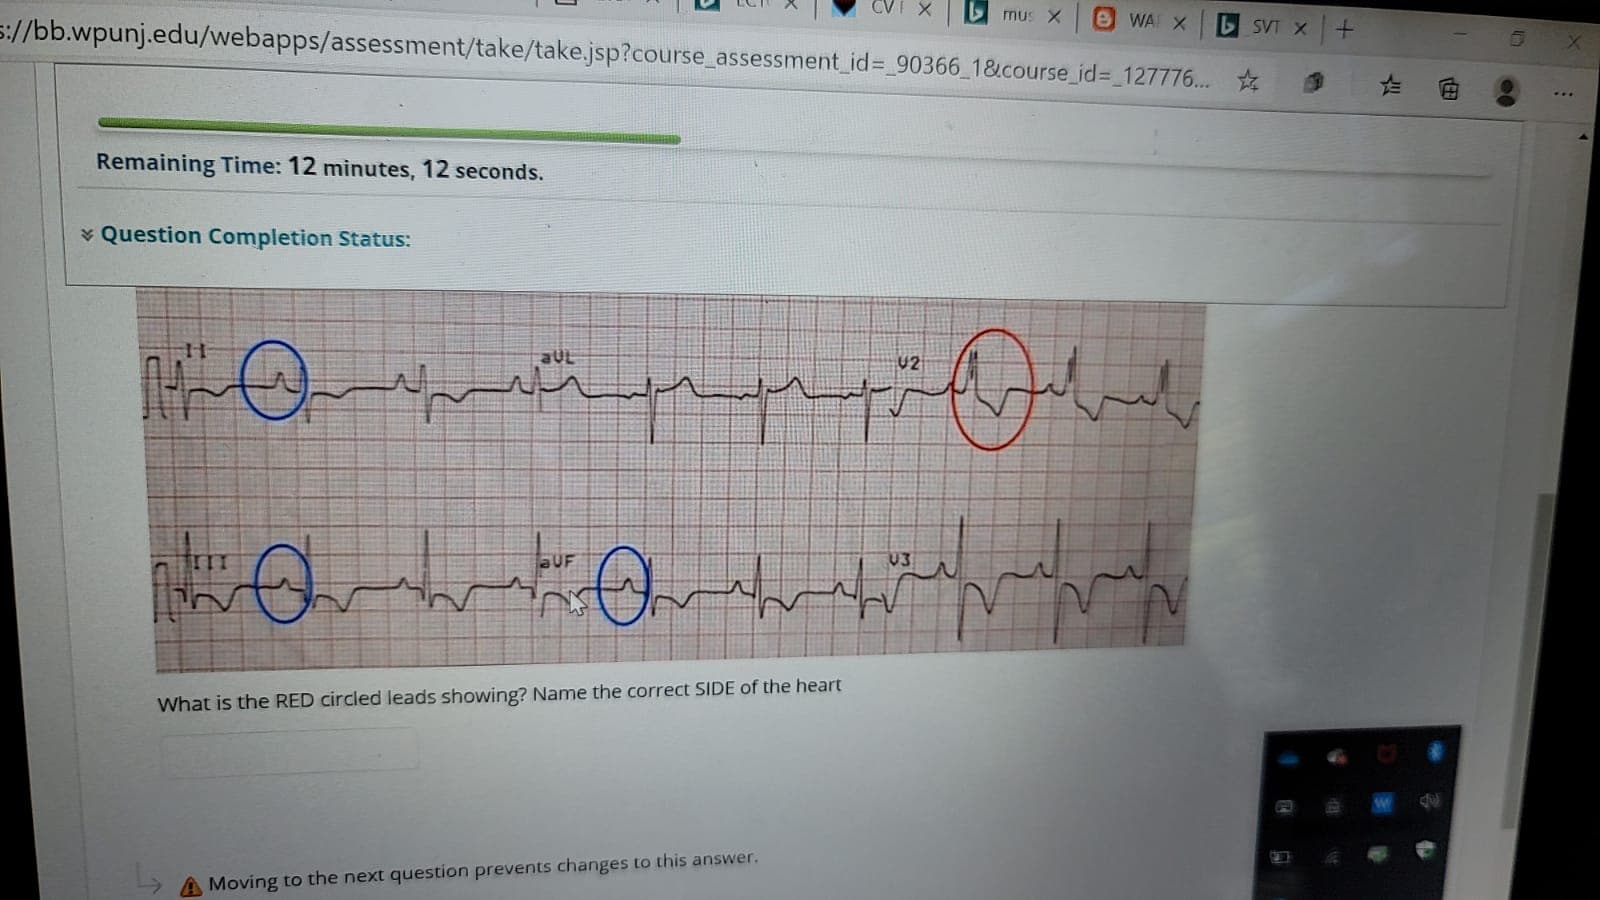 aUL
U2
aUF
What is the RED circled leads showing? Name the correct SIDE of the heart
